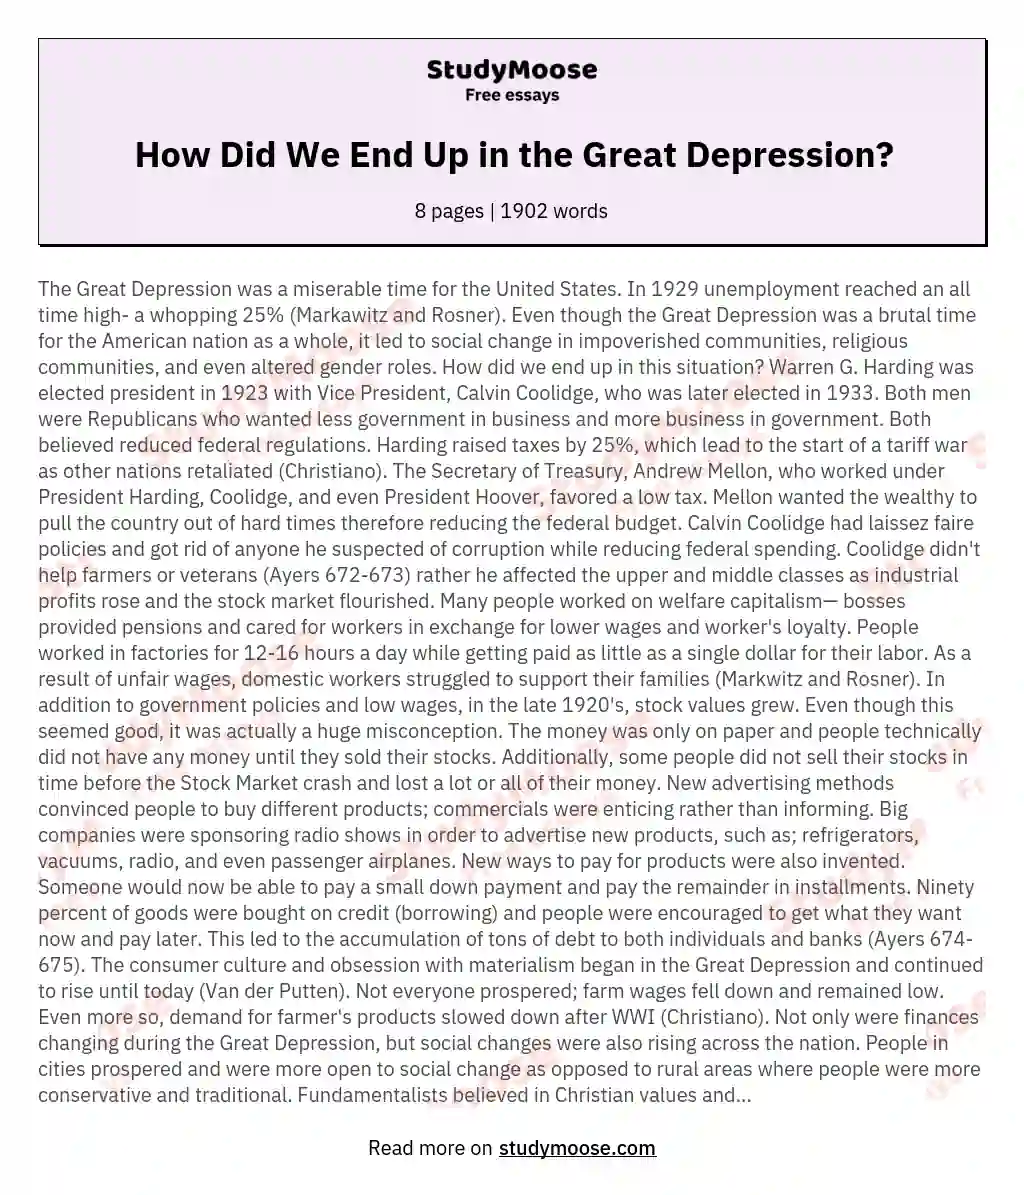 How Did We End Up in the Great Depression? essay